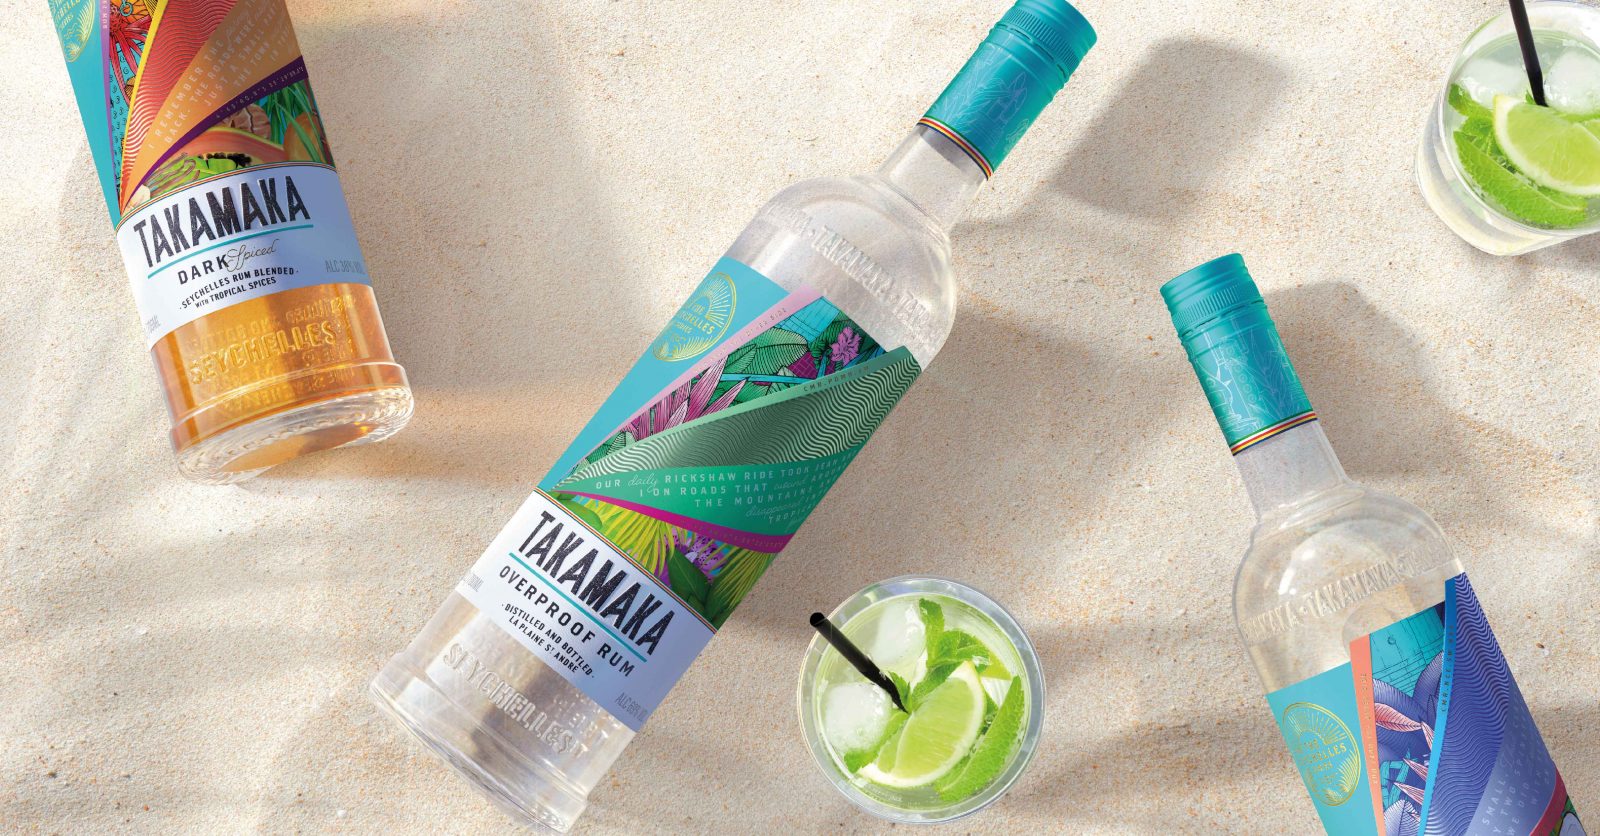 Pearlfisher Redesign Takamaka Rum to Expands its Reach and Mission